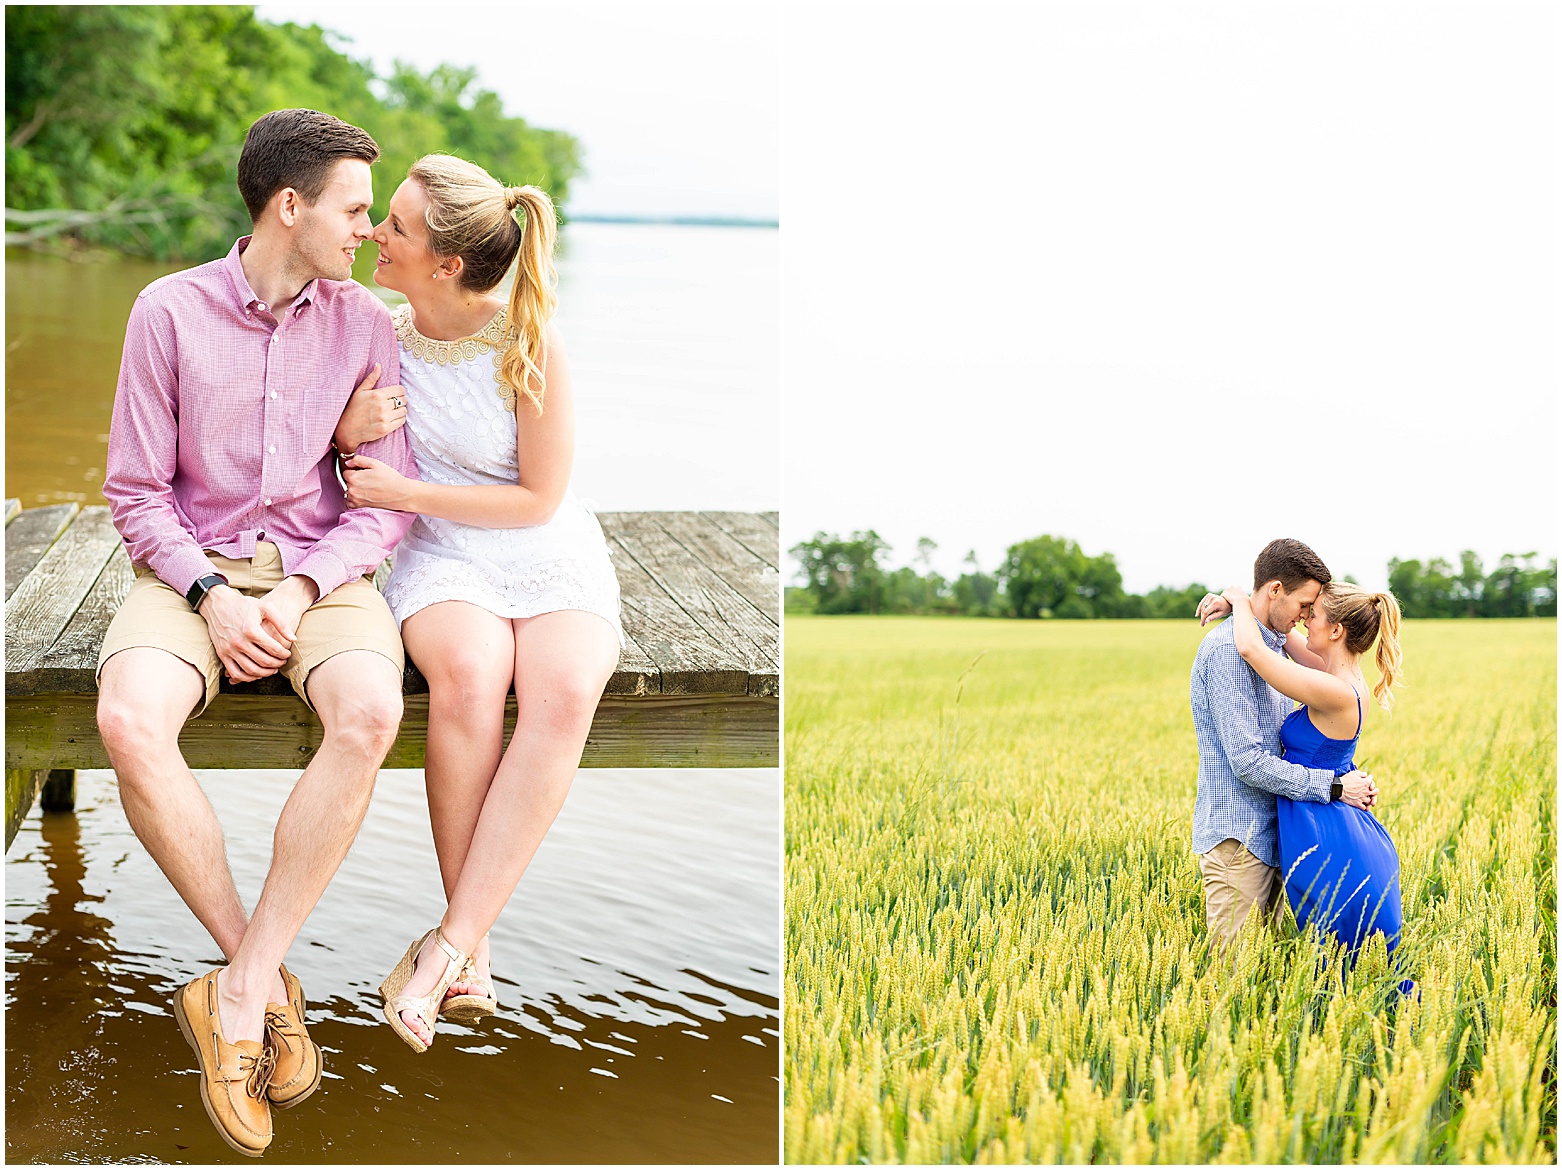 View More: http://hopetaylorphotographyphotos.pass.us/abbey-and-sam-engagement